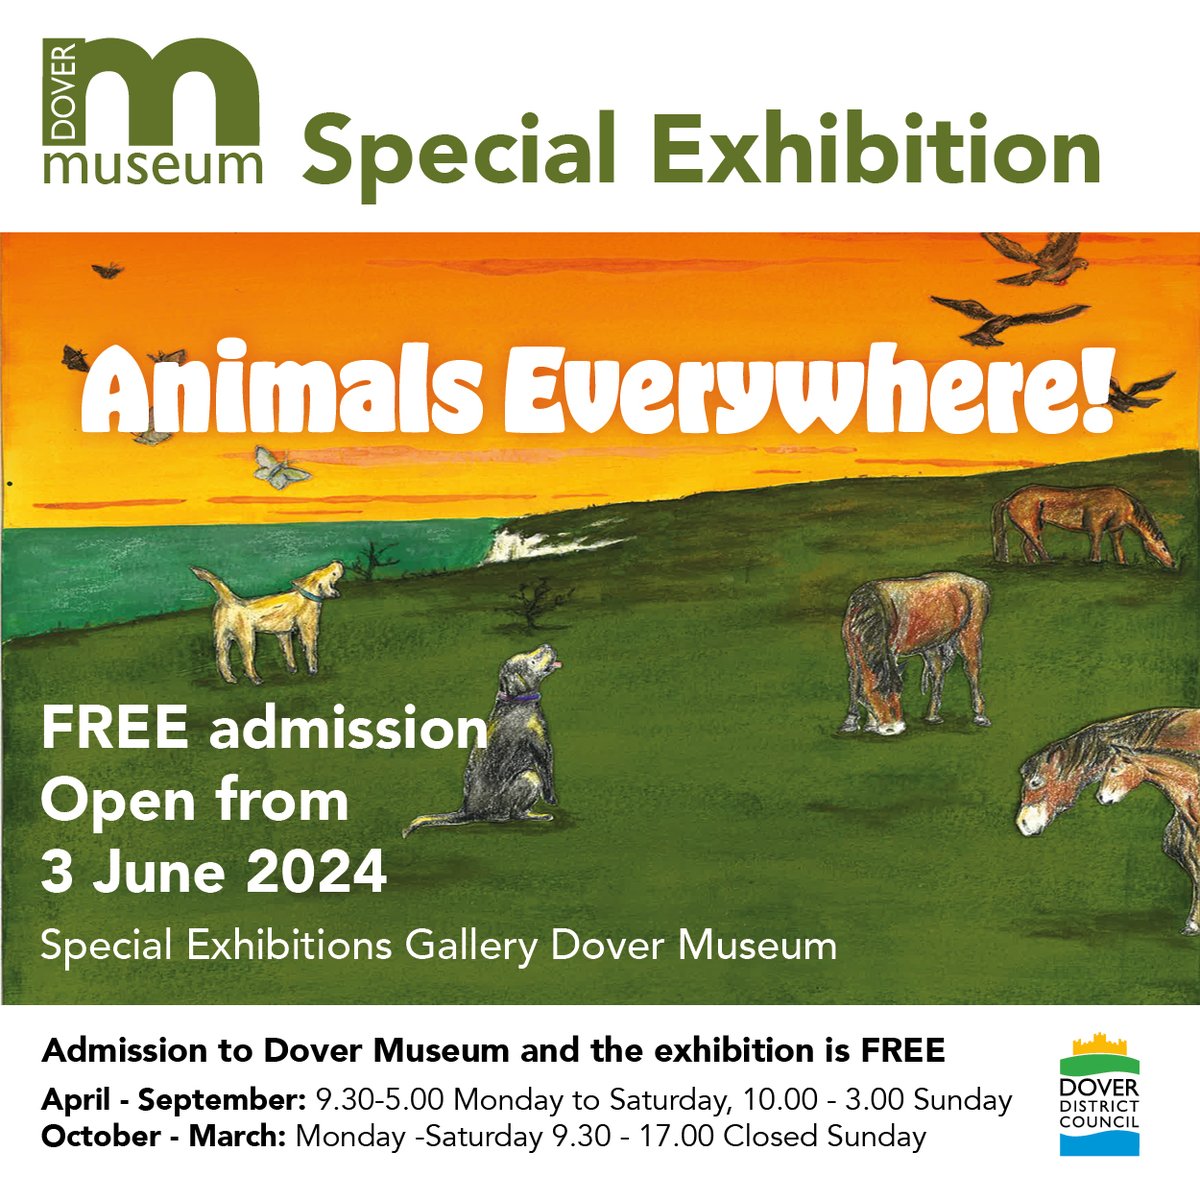 New! Special exhibition open from 3rd June 2024: Animals Everywhere! As the RSPCA celebrates its 200th anniversary, this exhibition looks at Britain’s obsession with and love of animals and the importance they have had in so many aspects of our lives over the centuries and today